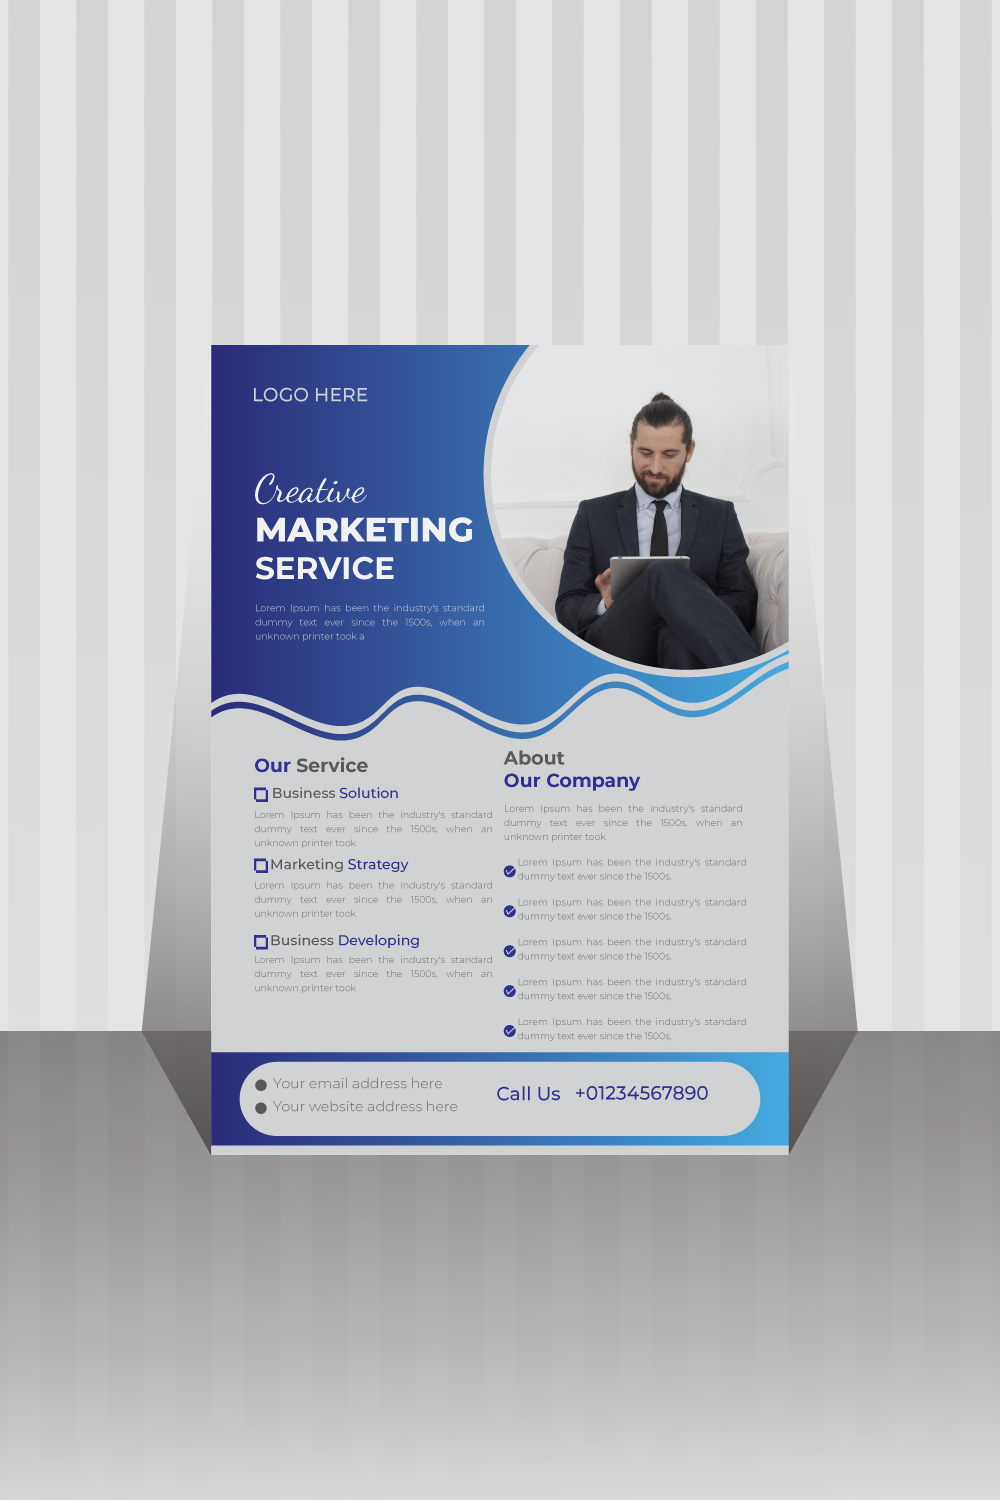 Image of a corporate business flyer with an irresistible design